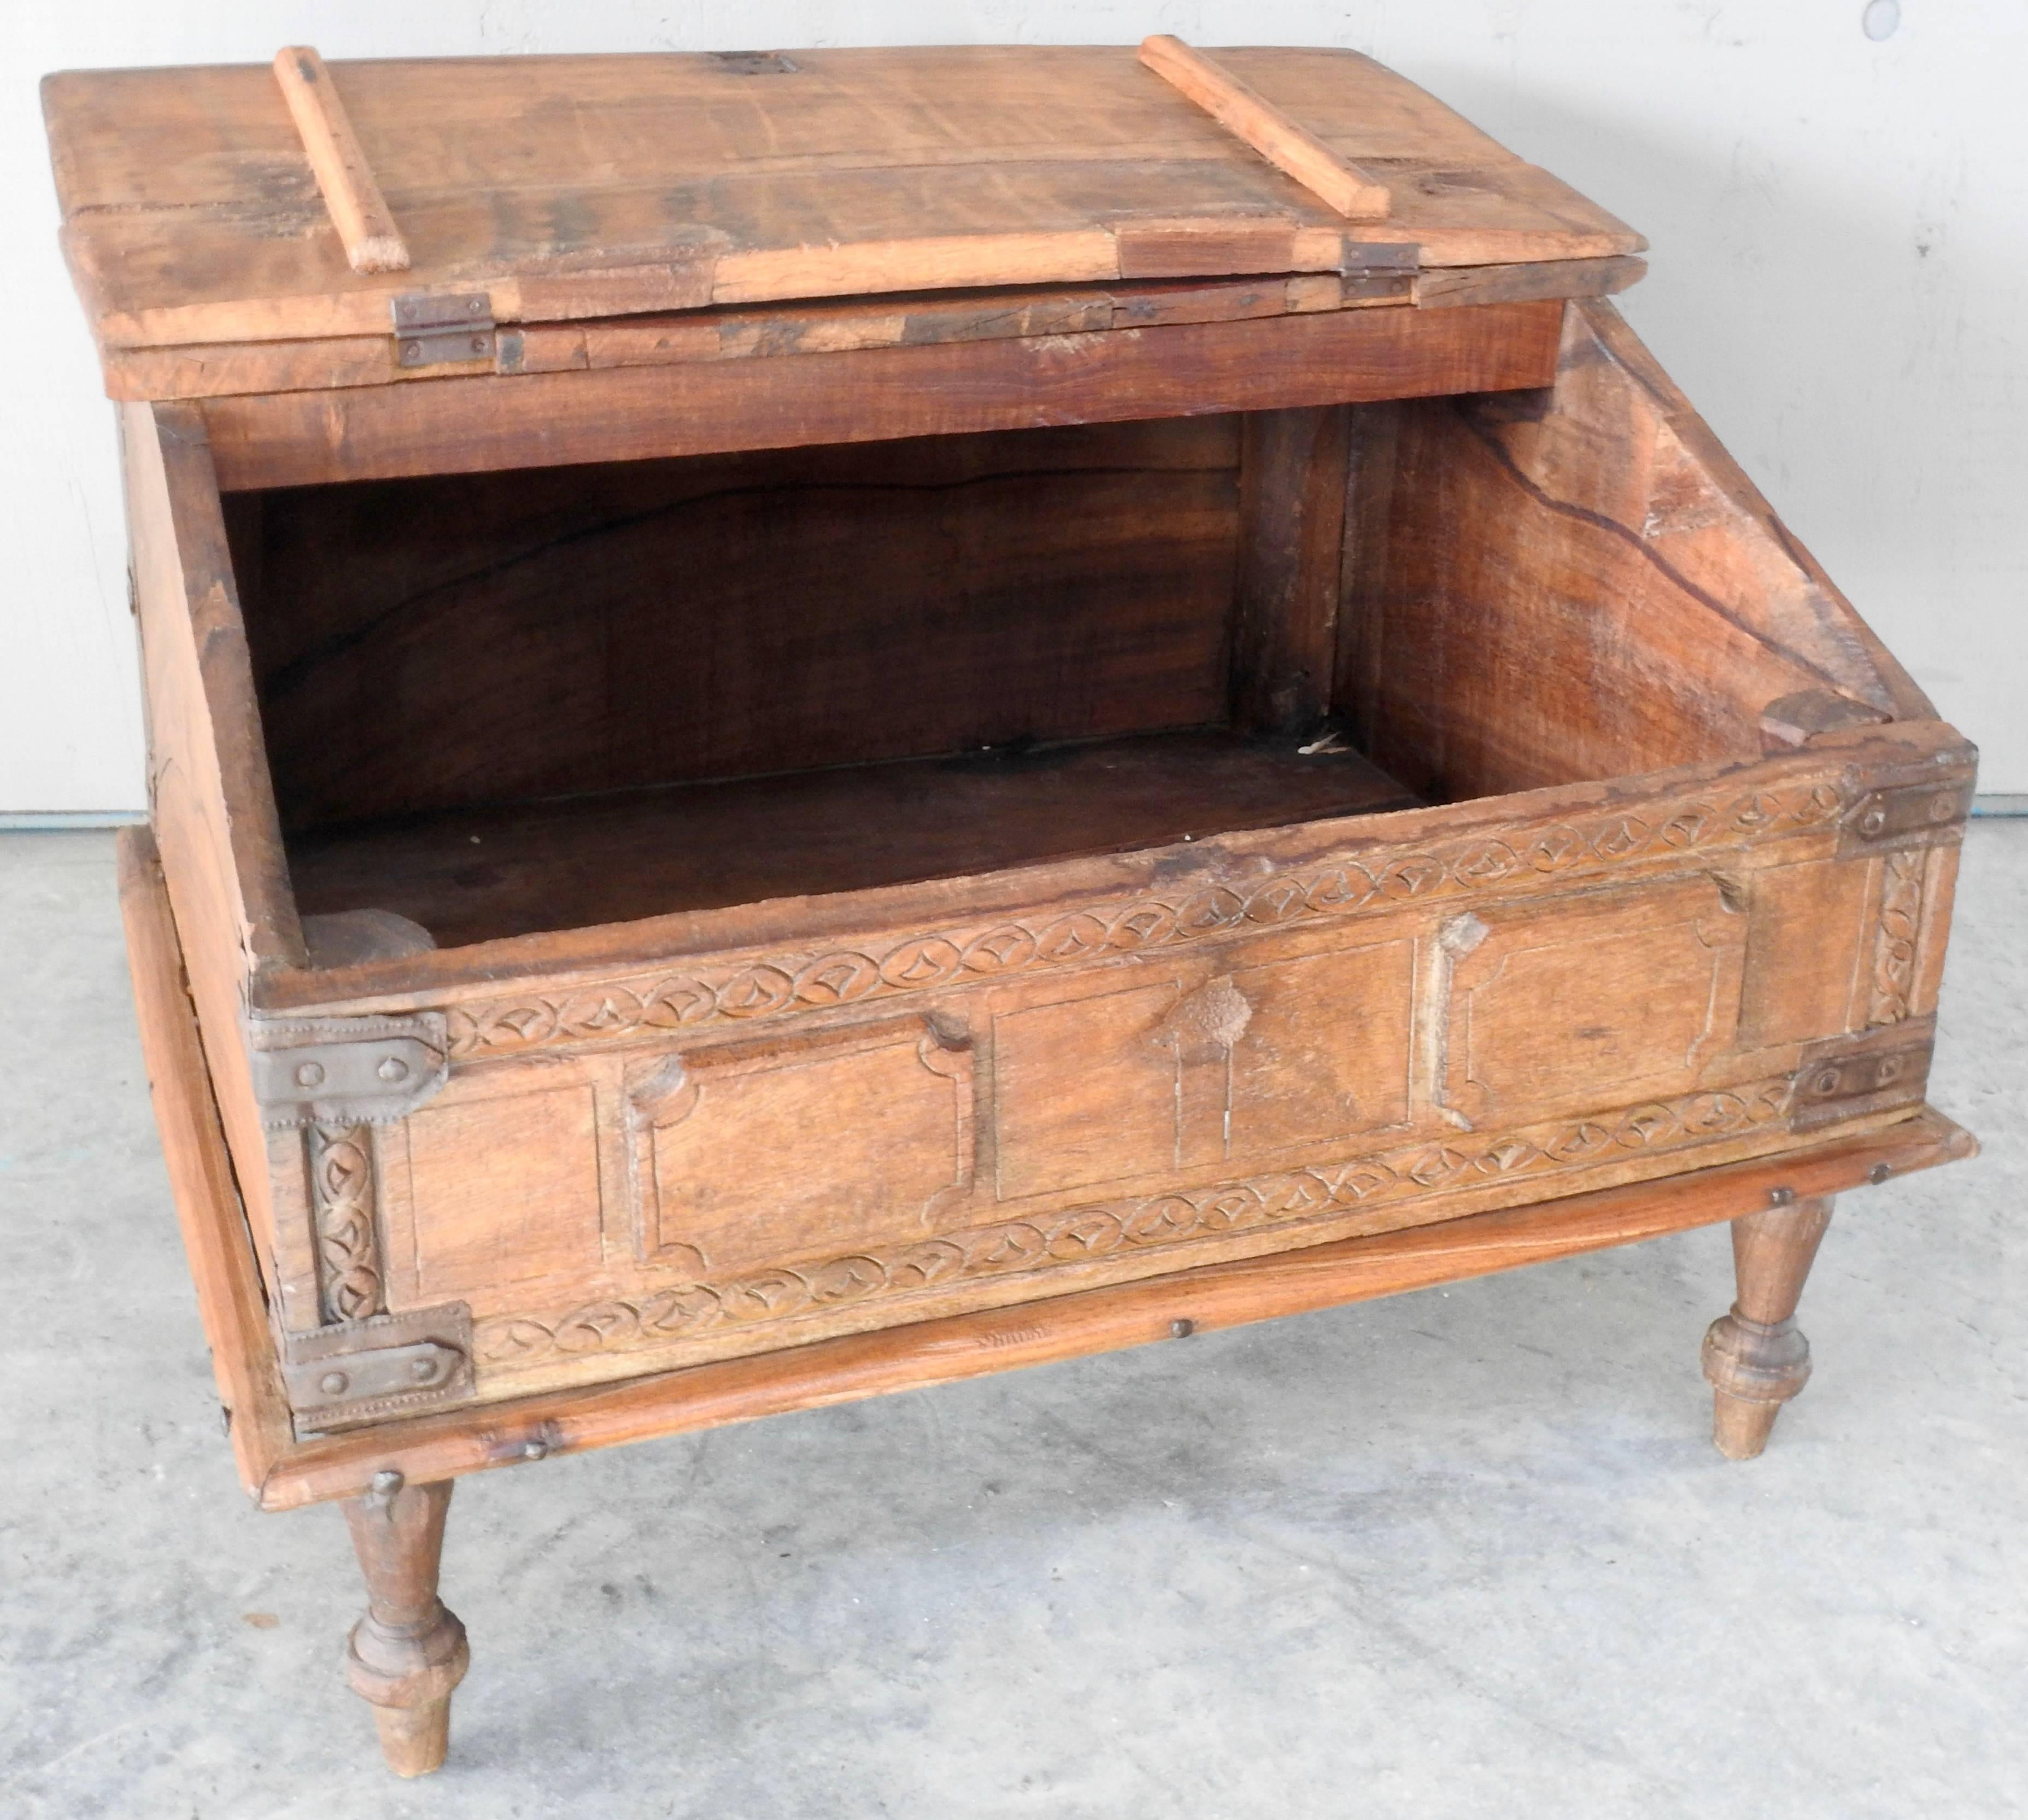 This Spanish writing desk for a child has a lift top for storage. It features great metal detailing on the corners with hand carved embellishments on the front. Metal brads add to the character of this desk from the 19th century.